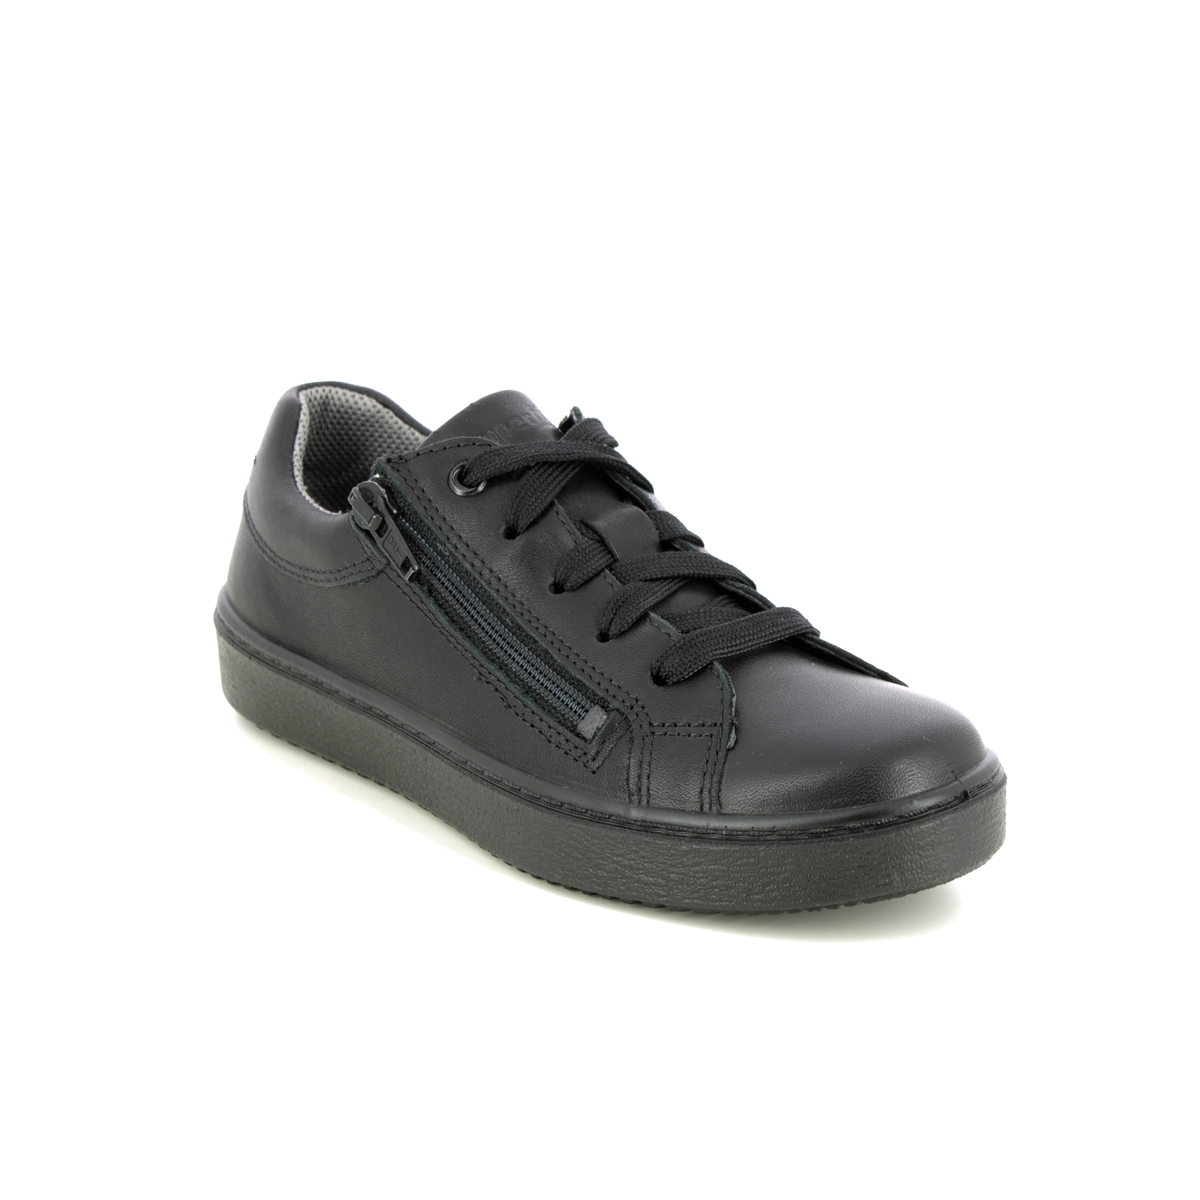 Superfit Heaven Zip Lace Black Leather Kids Girls Shoes 1006489-0000 In Size 36 In Plain Black Leather For kids